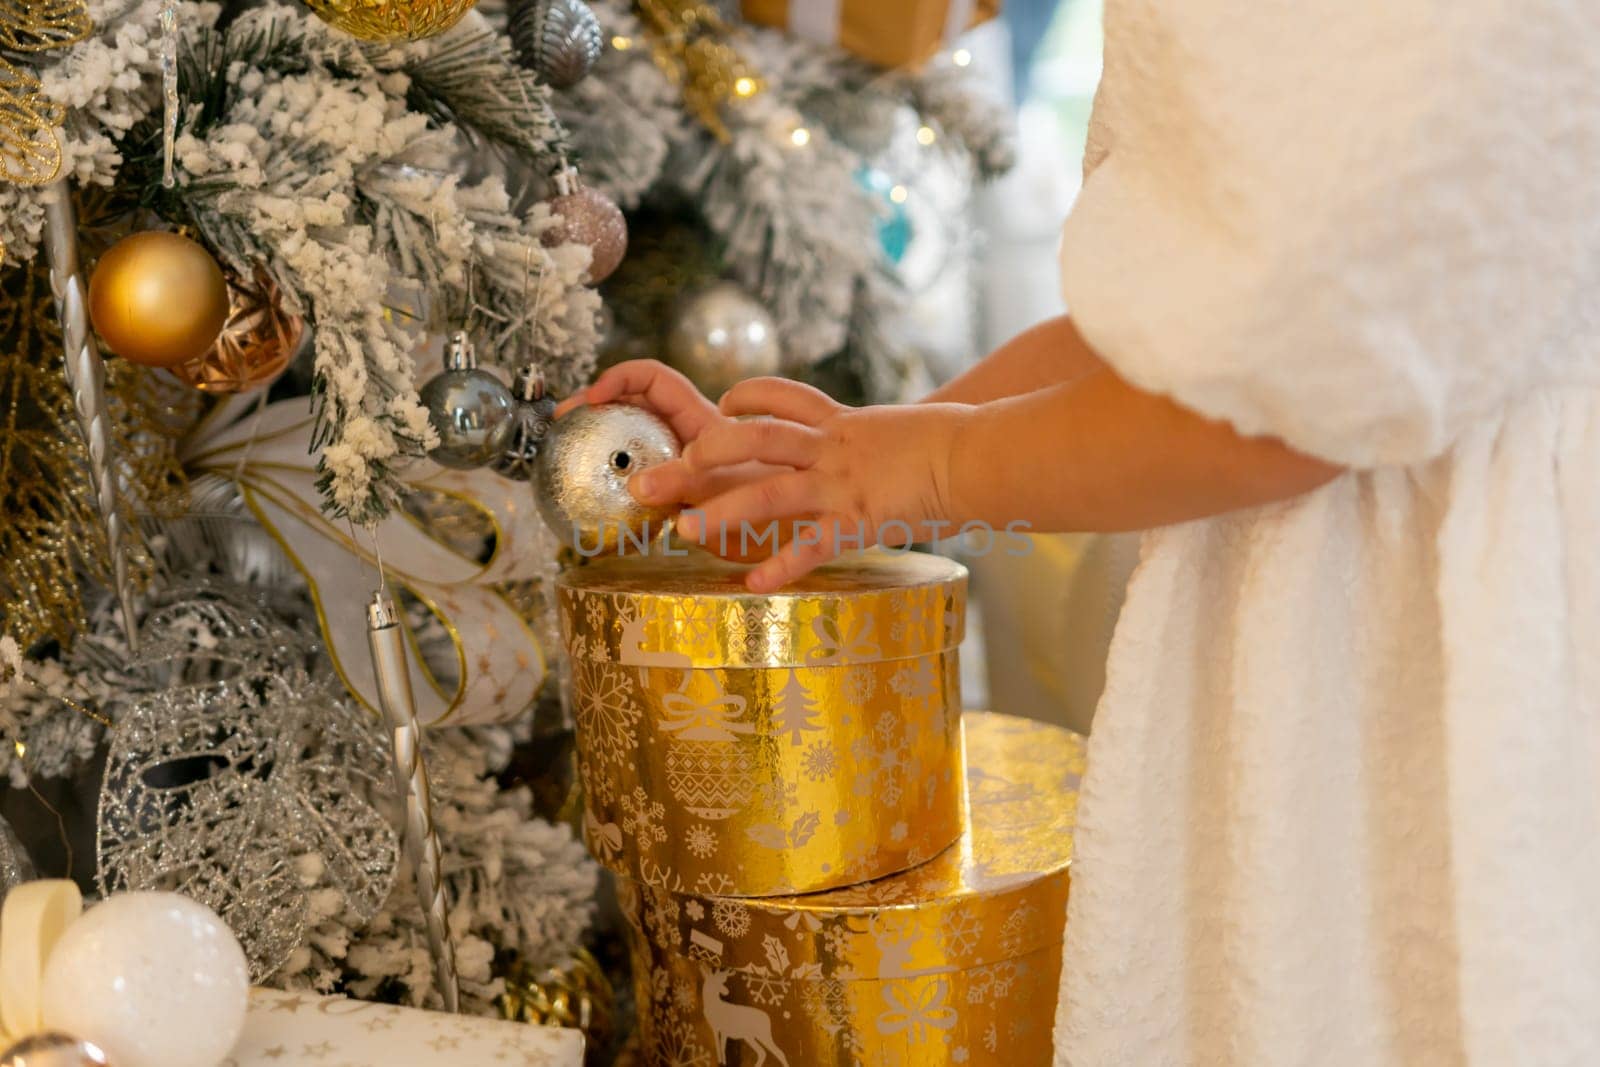 A woman is opening a gold box with a silver ball inside. The box is decorated with gold and silver ornaments, and the woman is wearing a white dress. The scene is set in a room with a Christmas tree